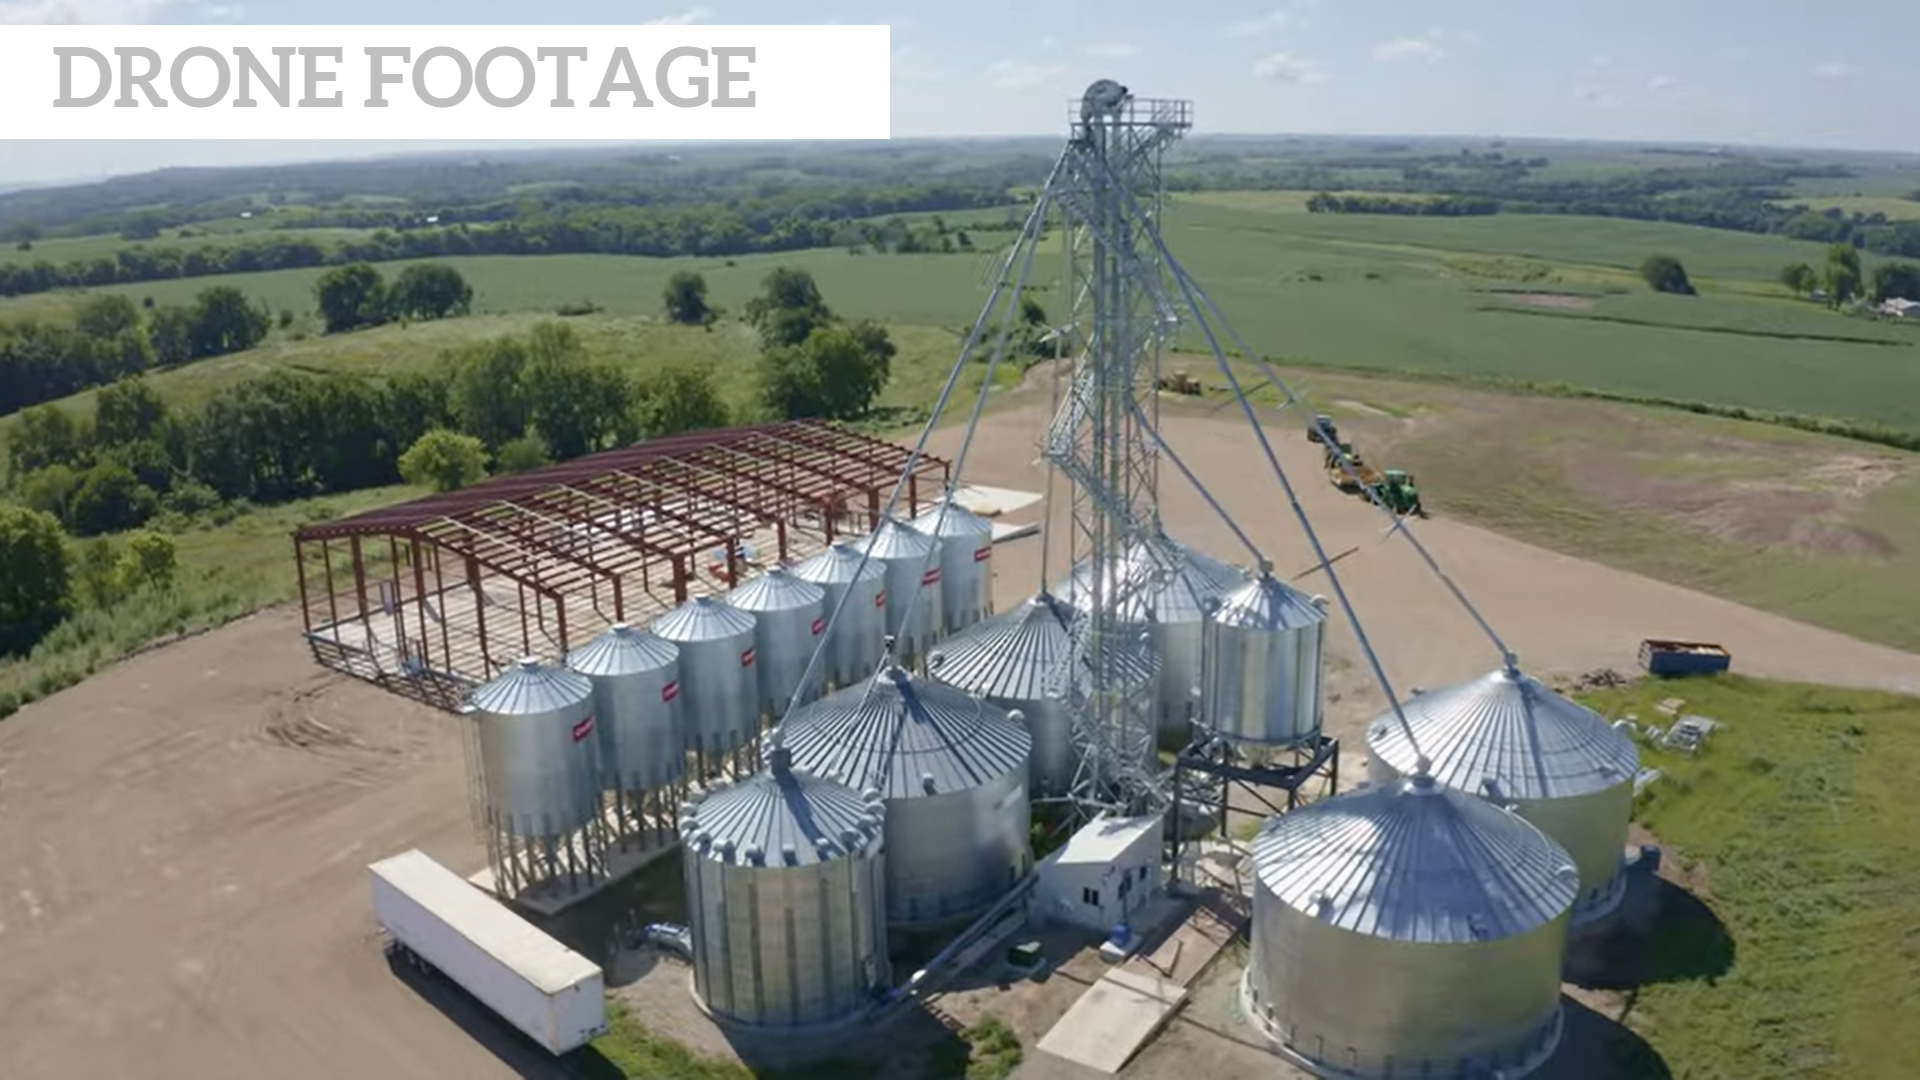 An aerial view of a row of silos in a field.